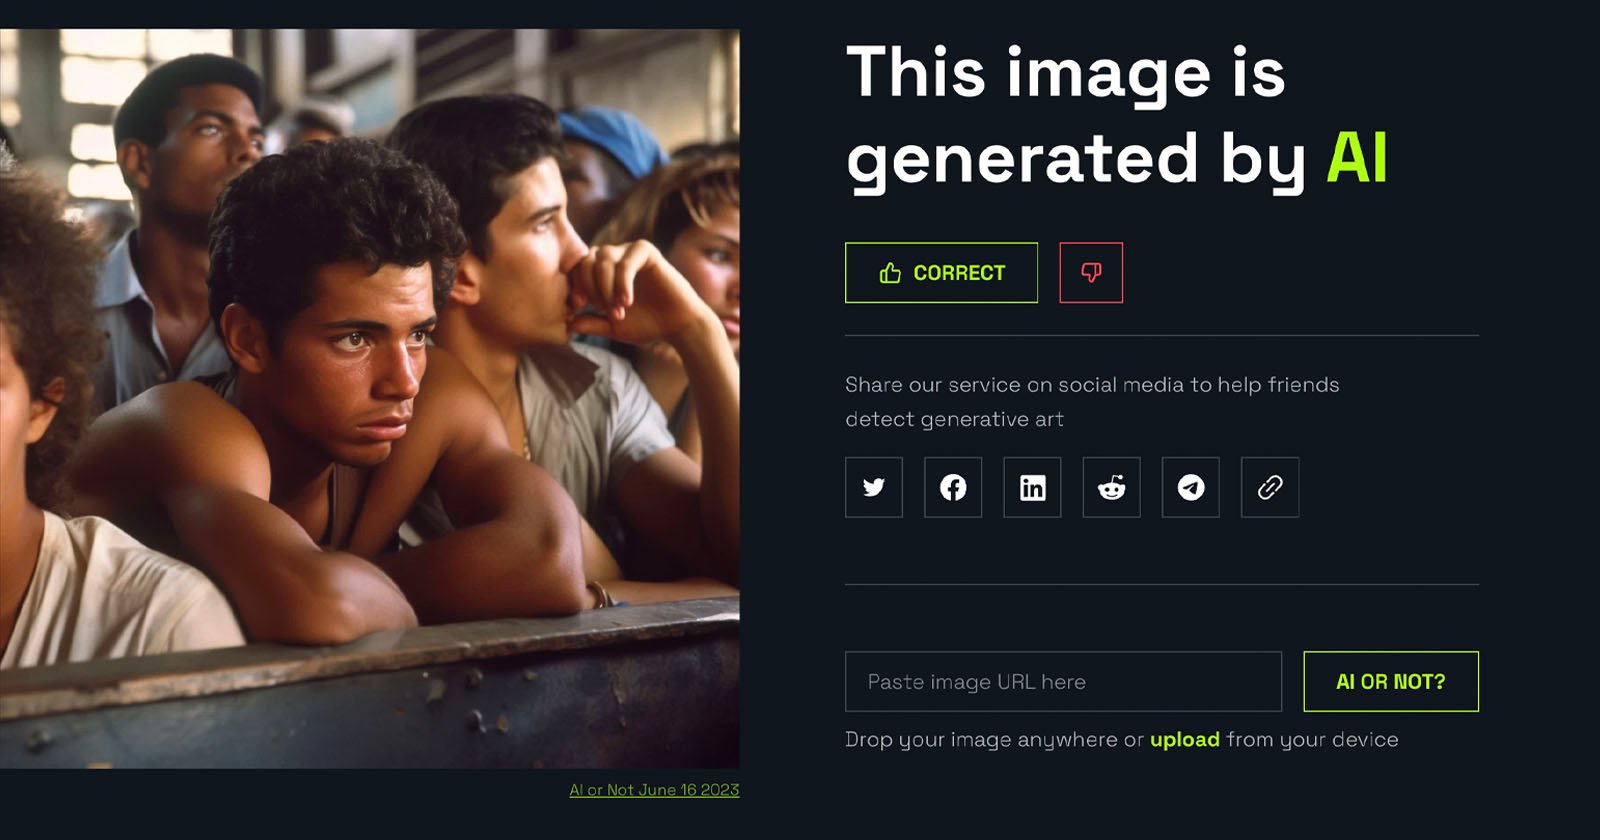 AI or Not is a Free Web App That Claims to Detect AI Generated Photos